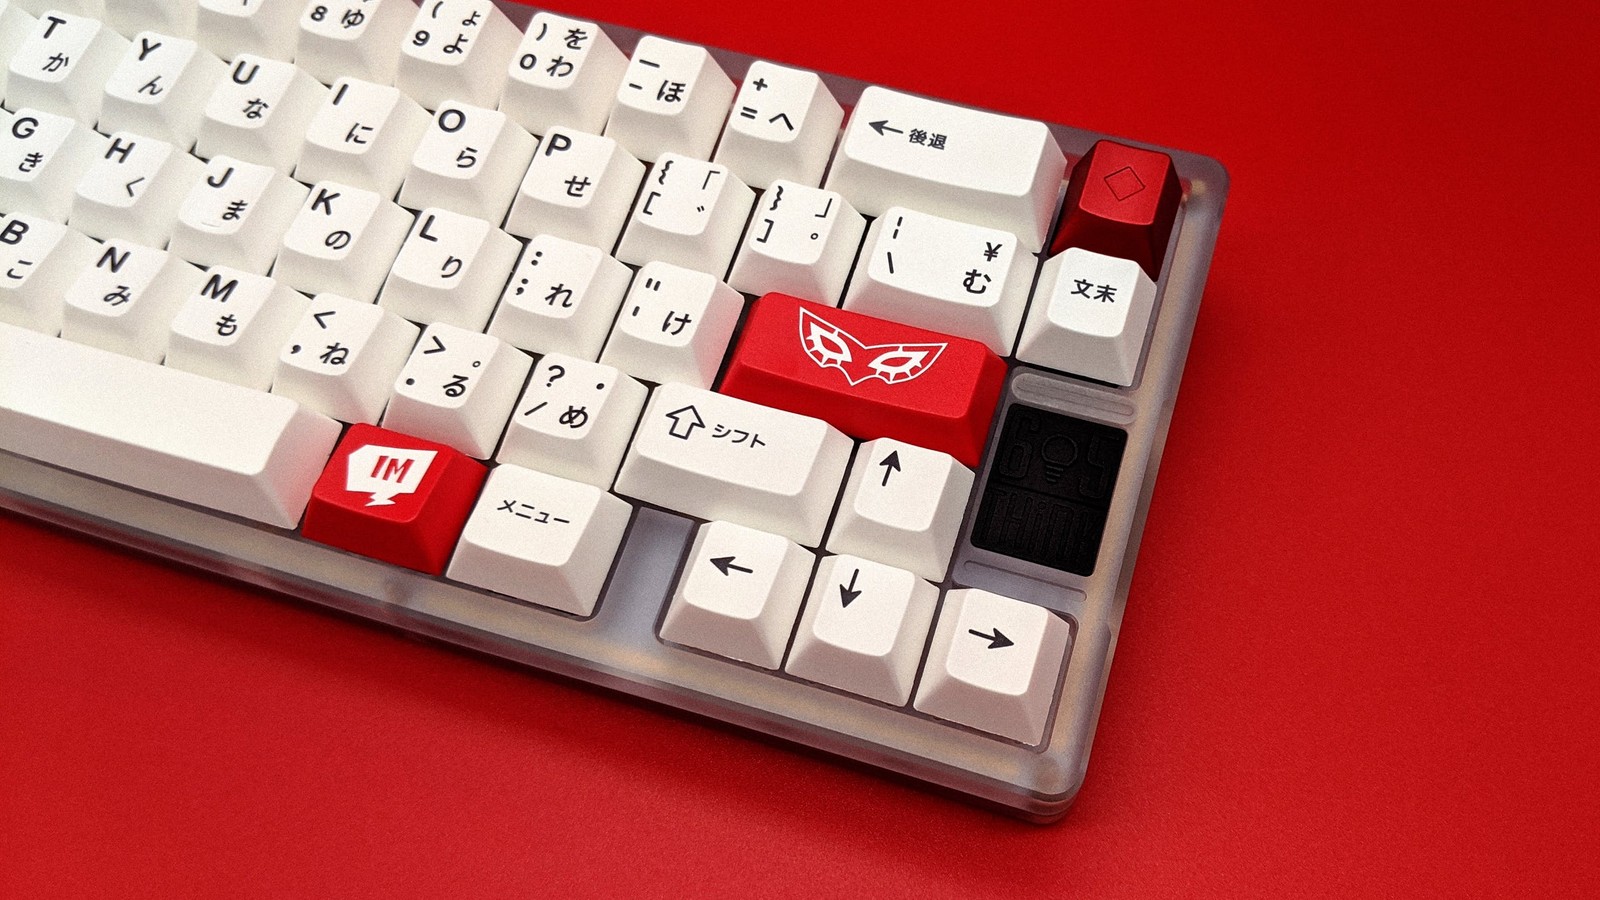 Think 6.5 keyboard with kuro/shiro keycaps and GMK Metaverse red accents on red background